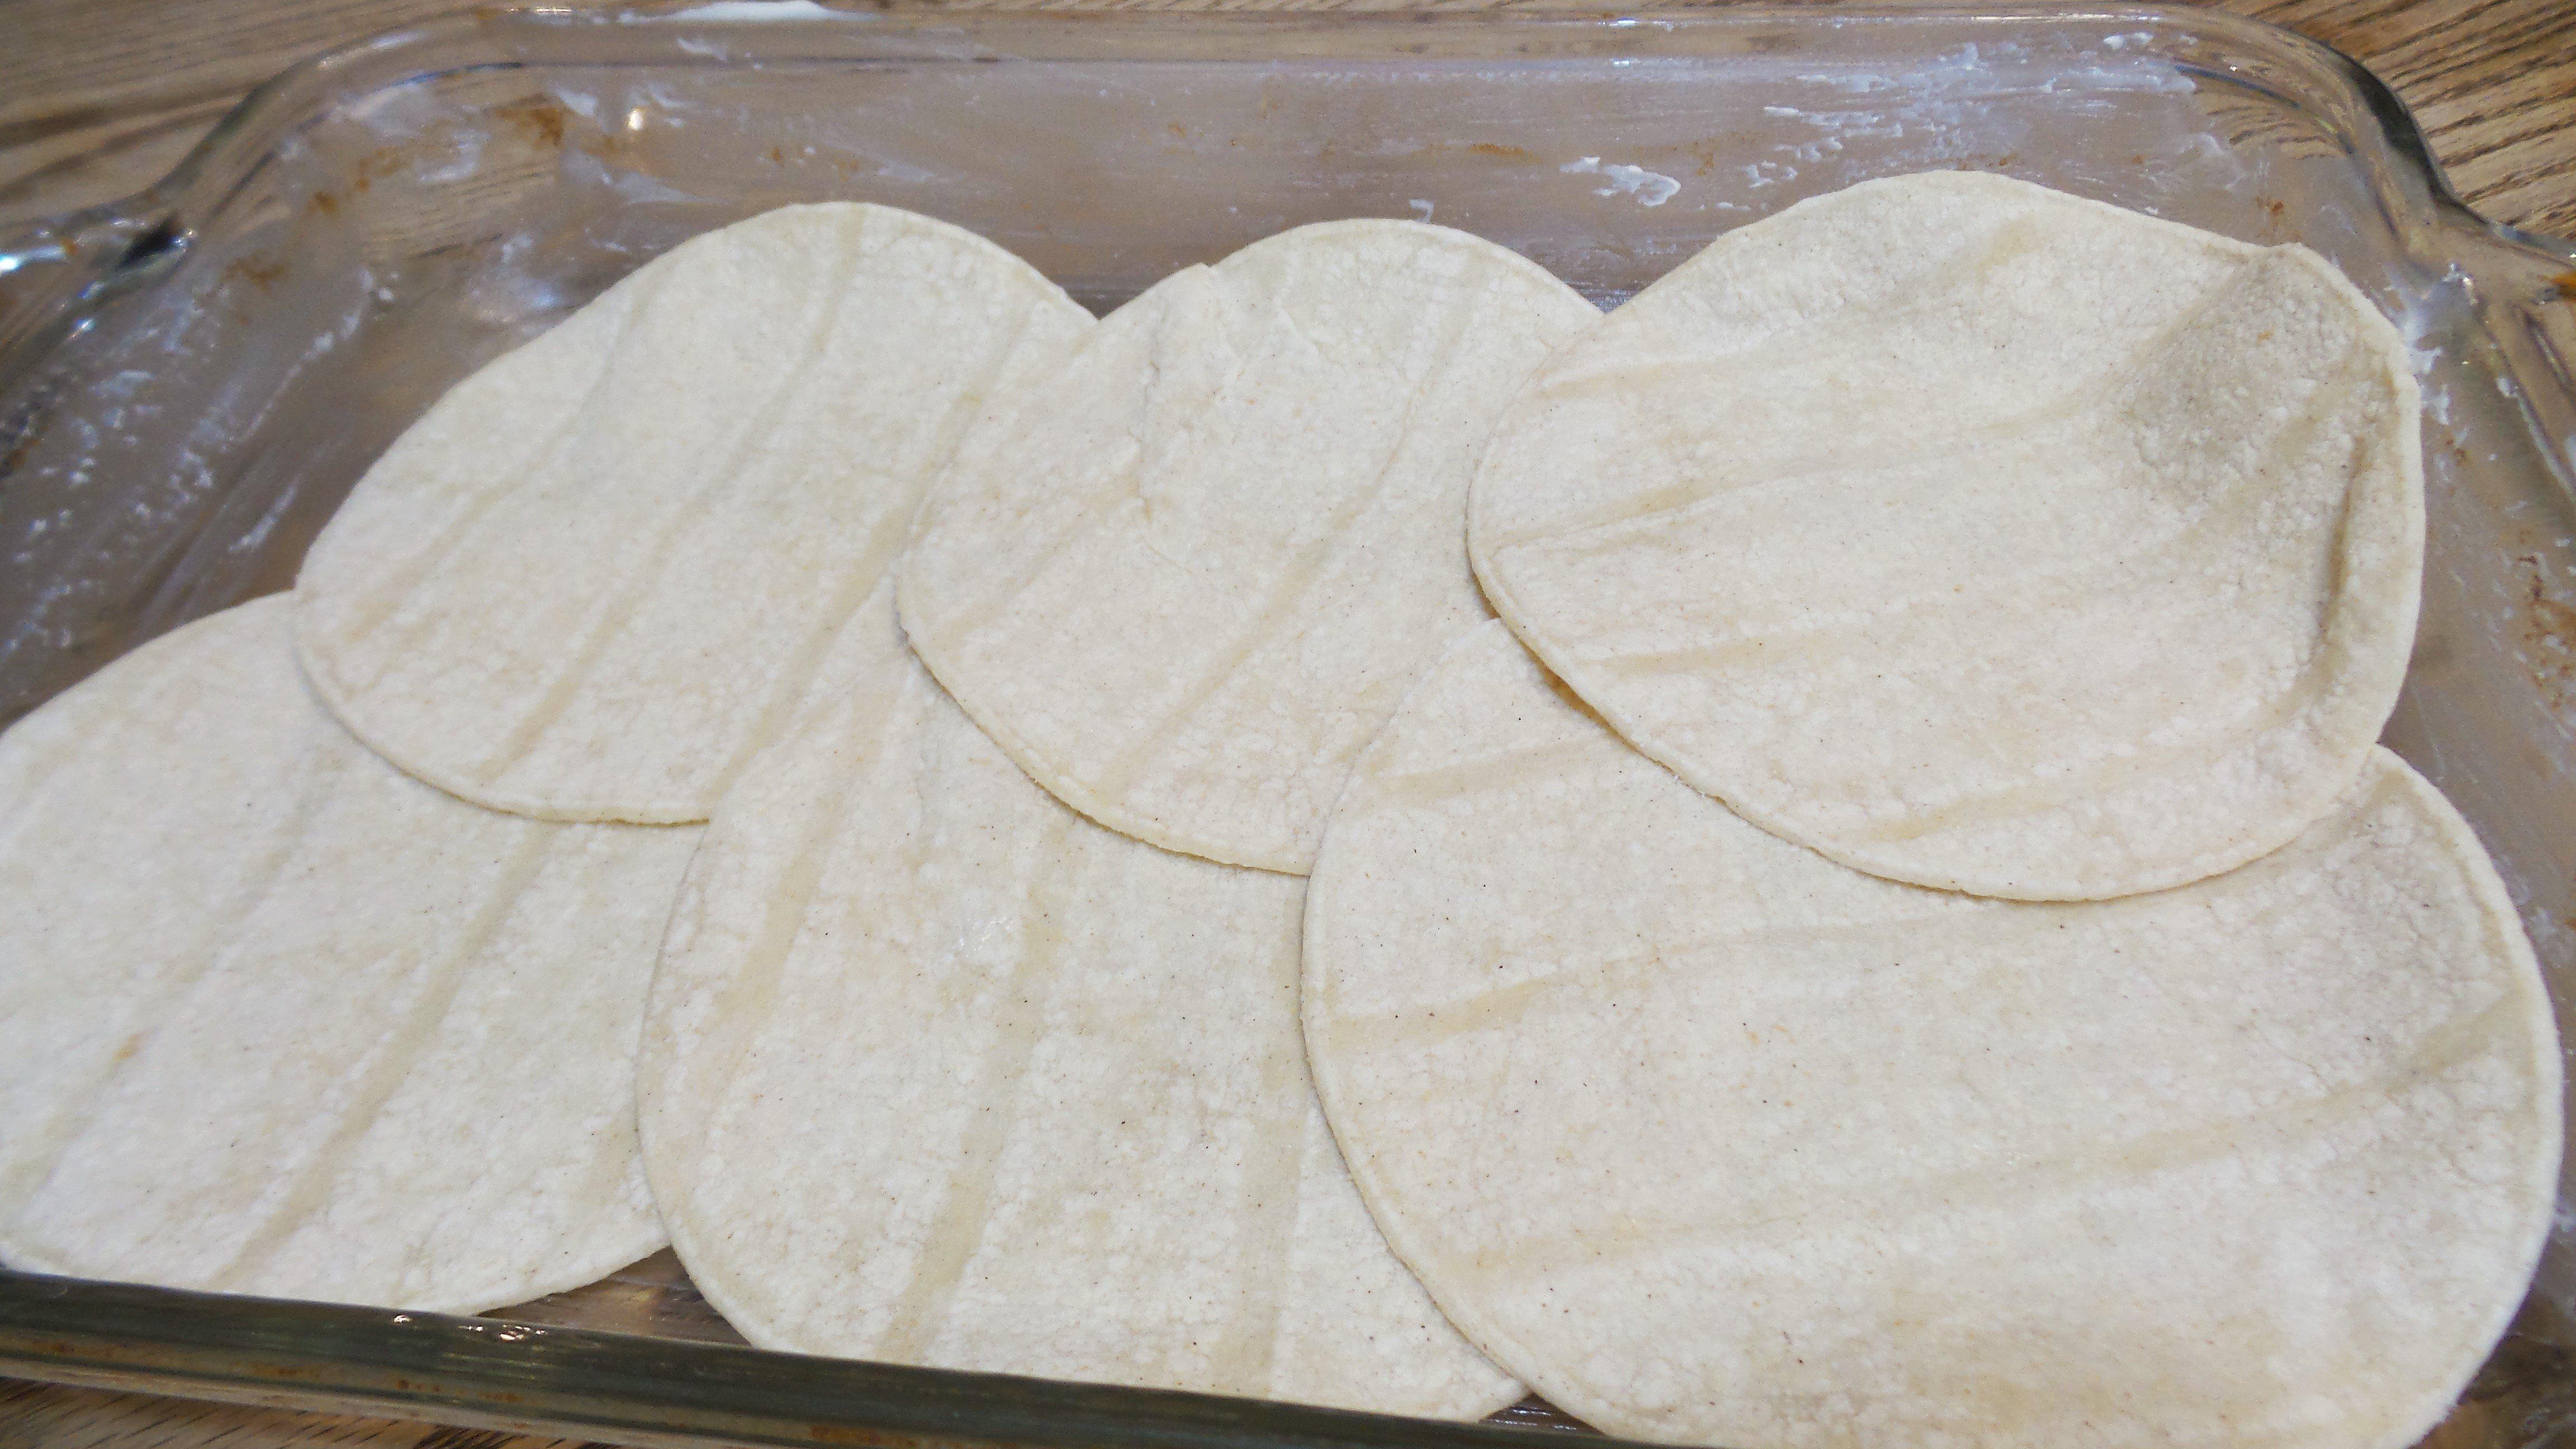 Line the dish with tortillas.